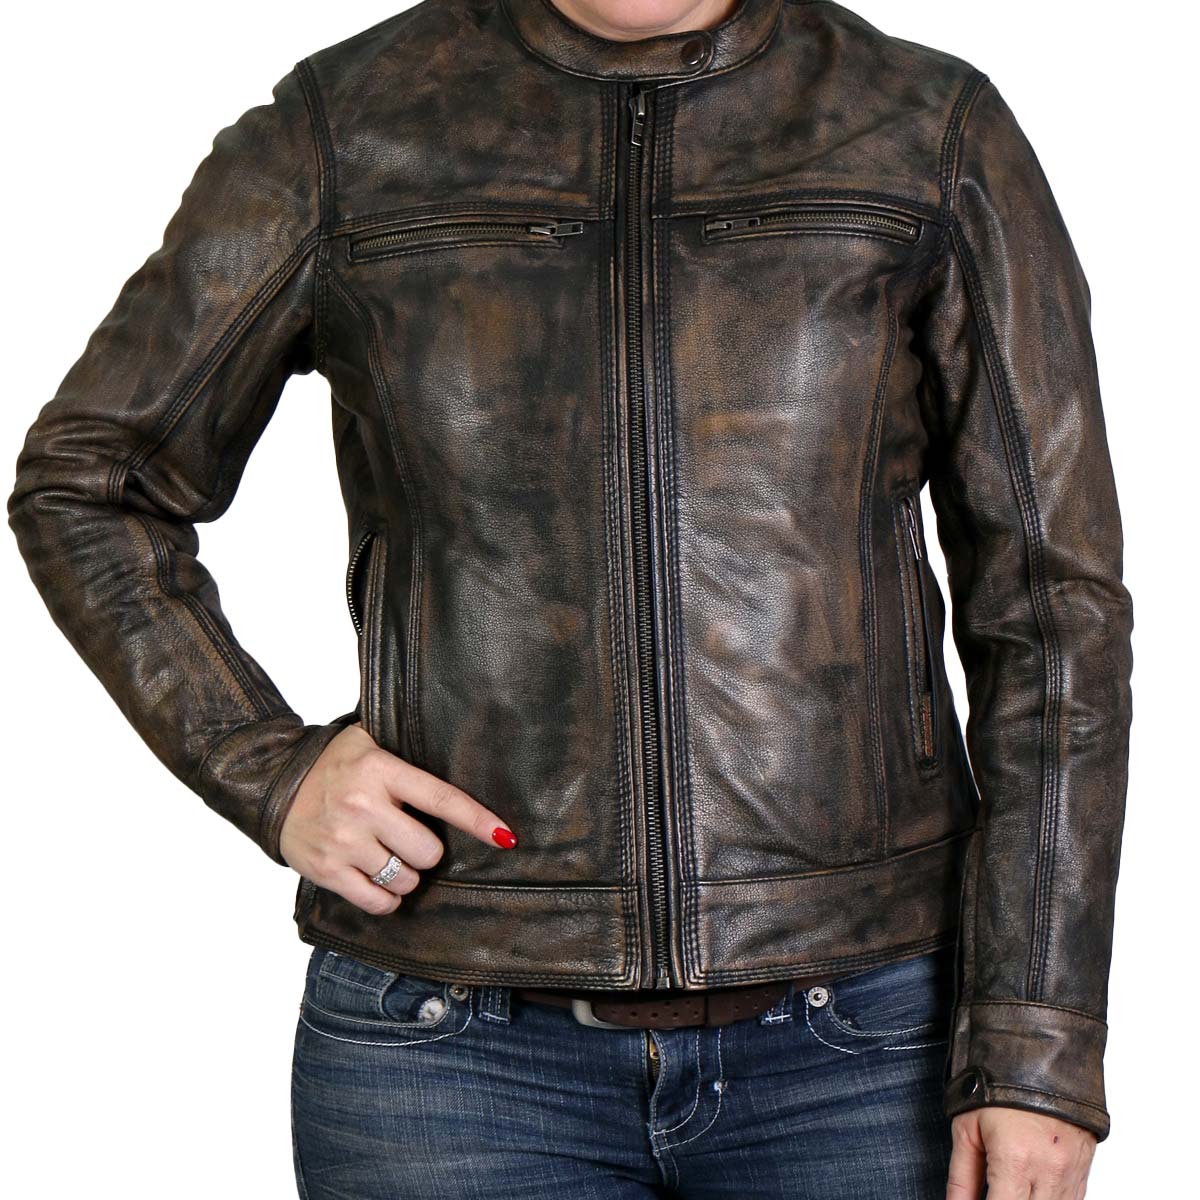 Hot Leathers JKL1024 Women's Distressed Brown Leather Jacket with Conceal and Carry Pockets